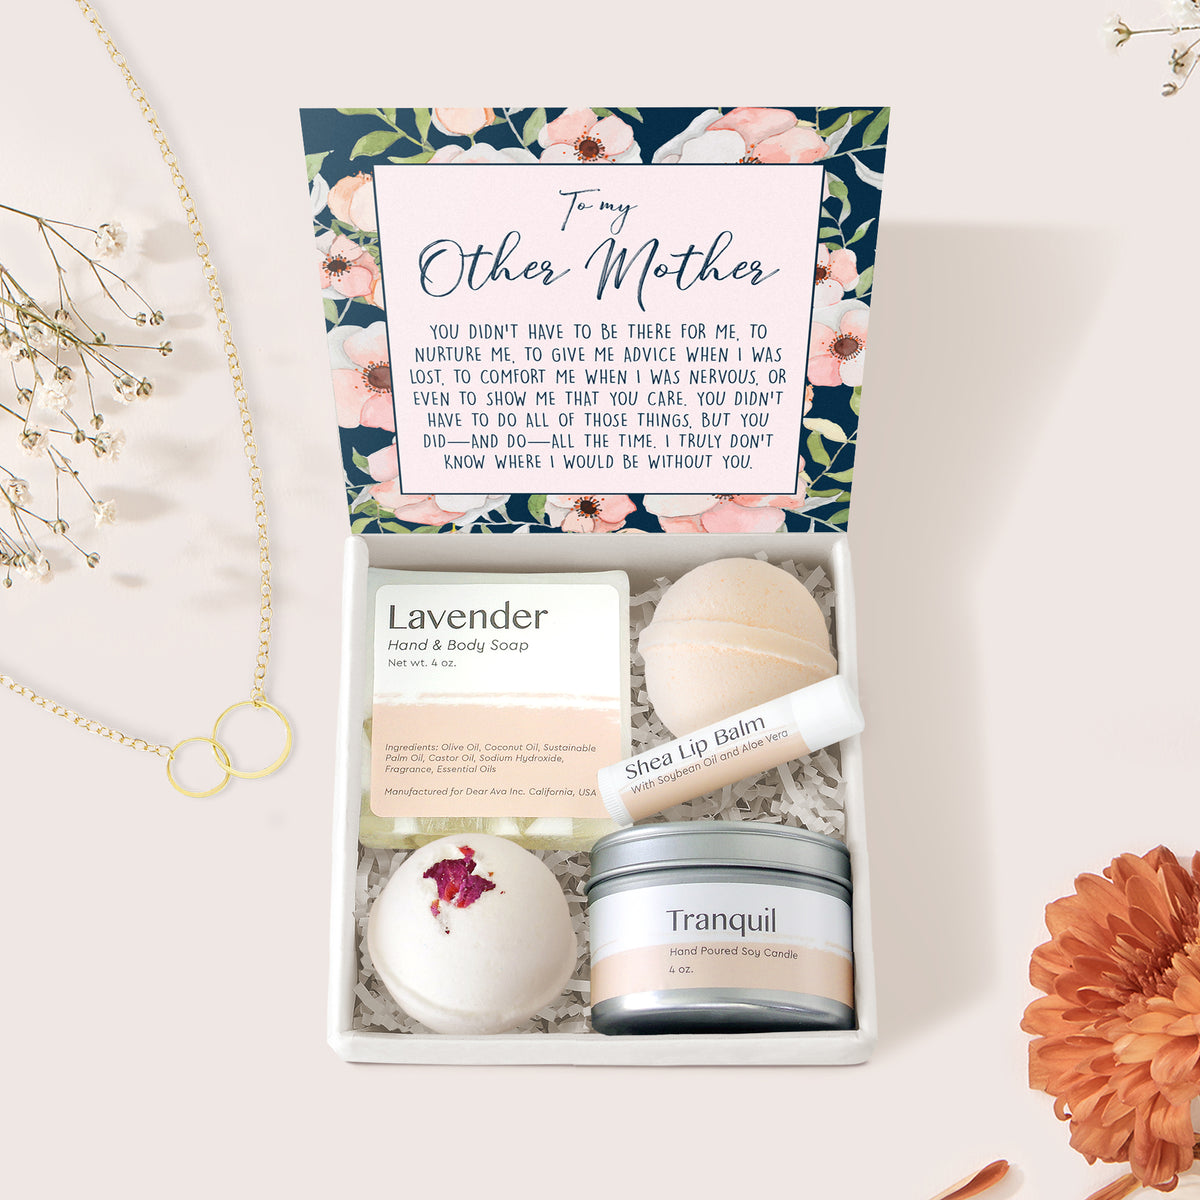 Other Mother Spa Gift Box